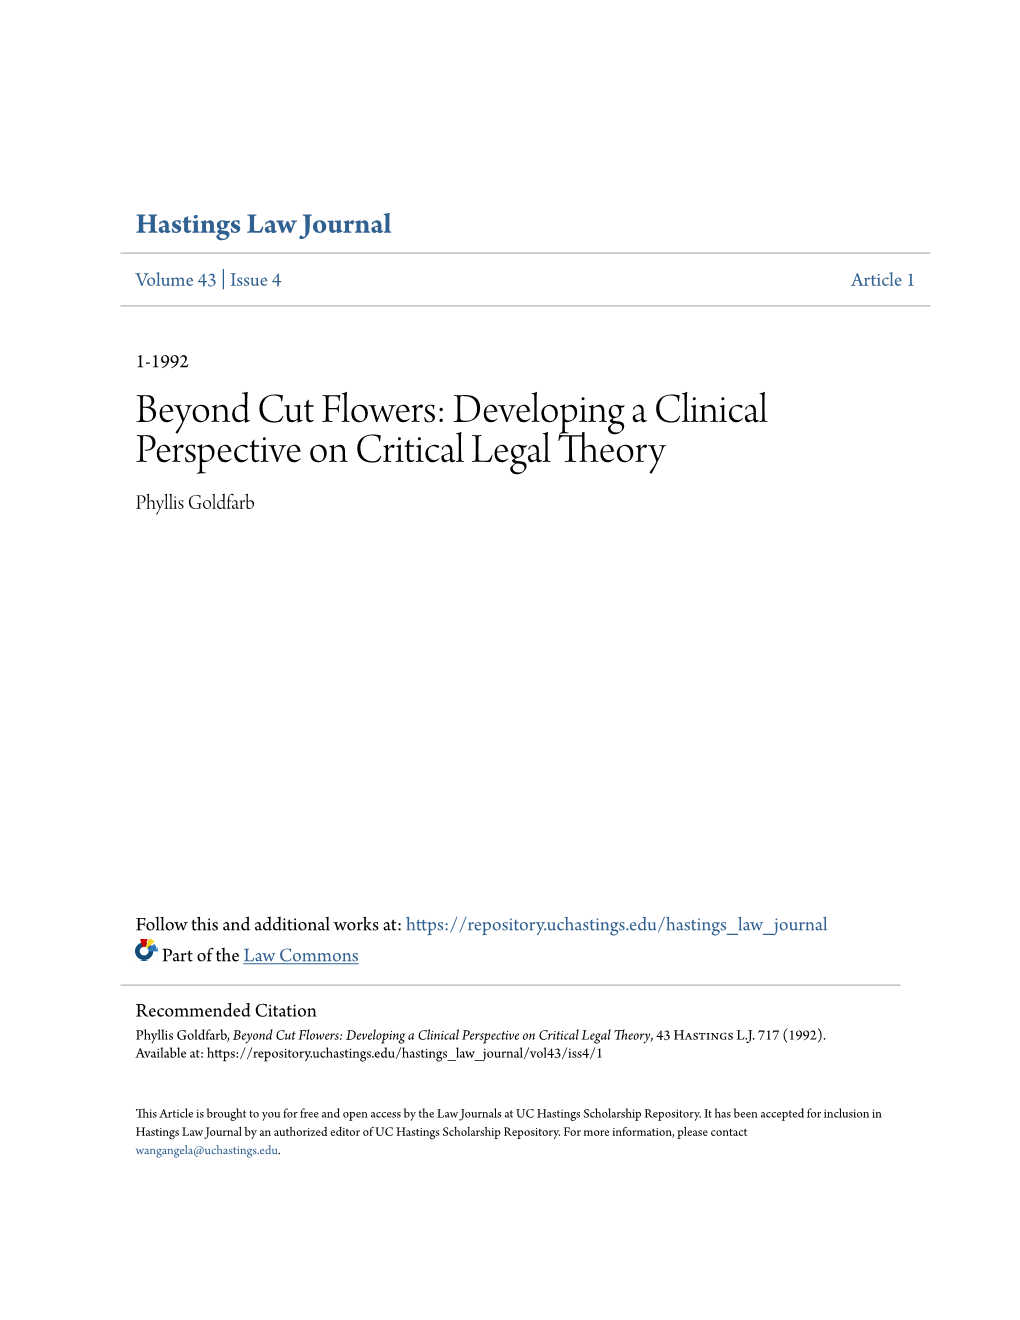 Developing a Clinical Perspective on Critical Legal Theory Phyllis Goldfarb